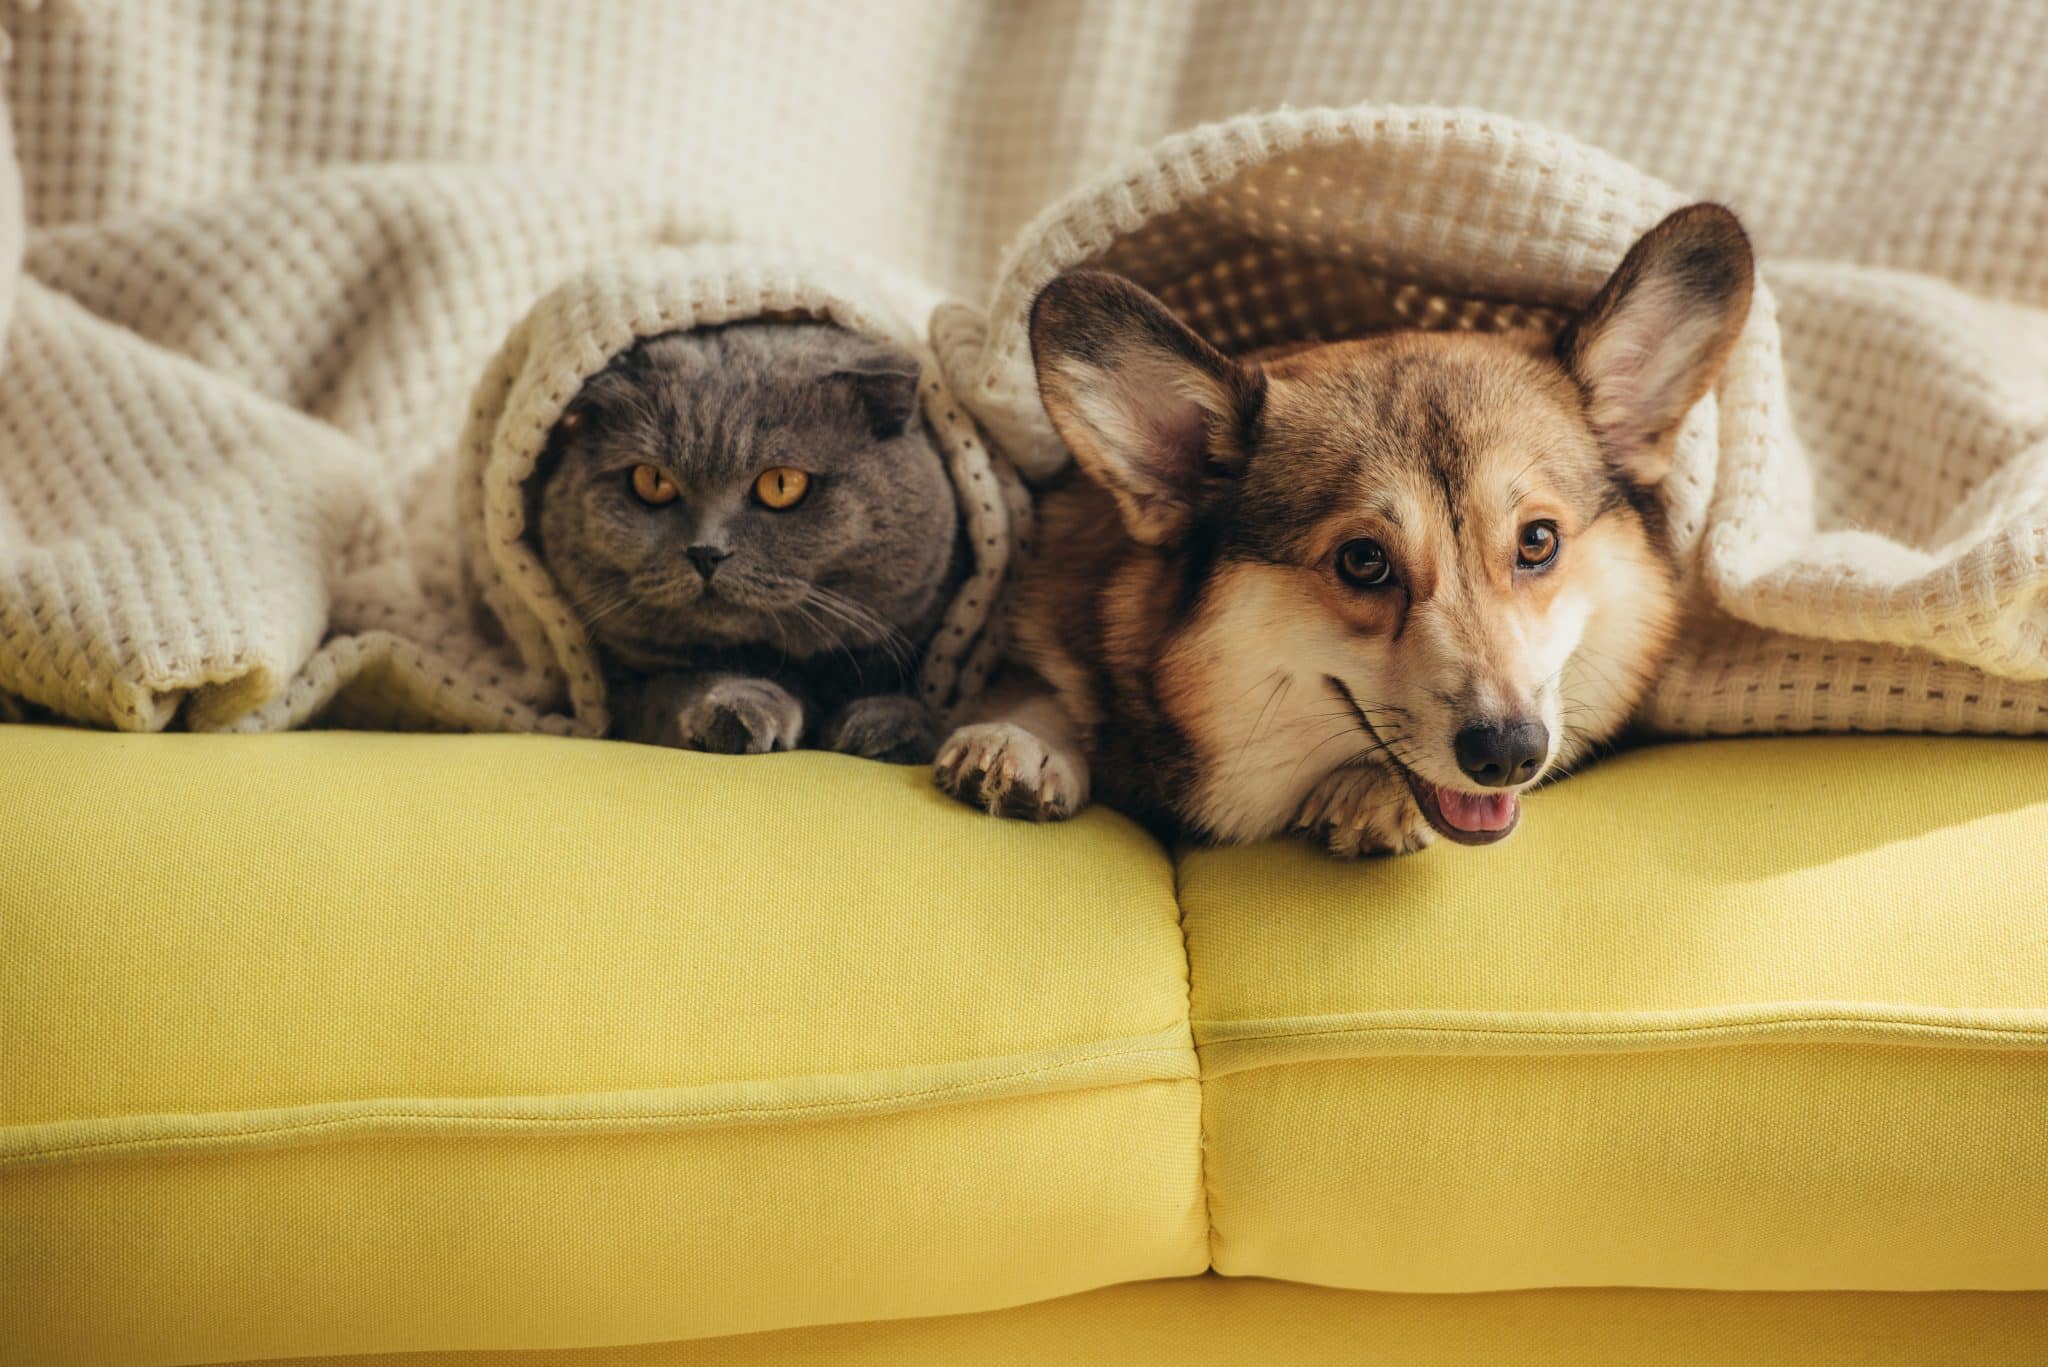 Cat and dog lying together on a couch while under a blanket